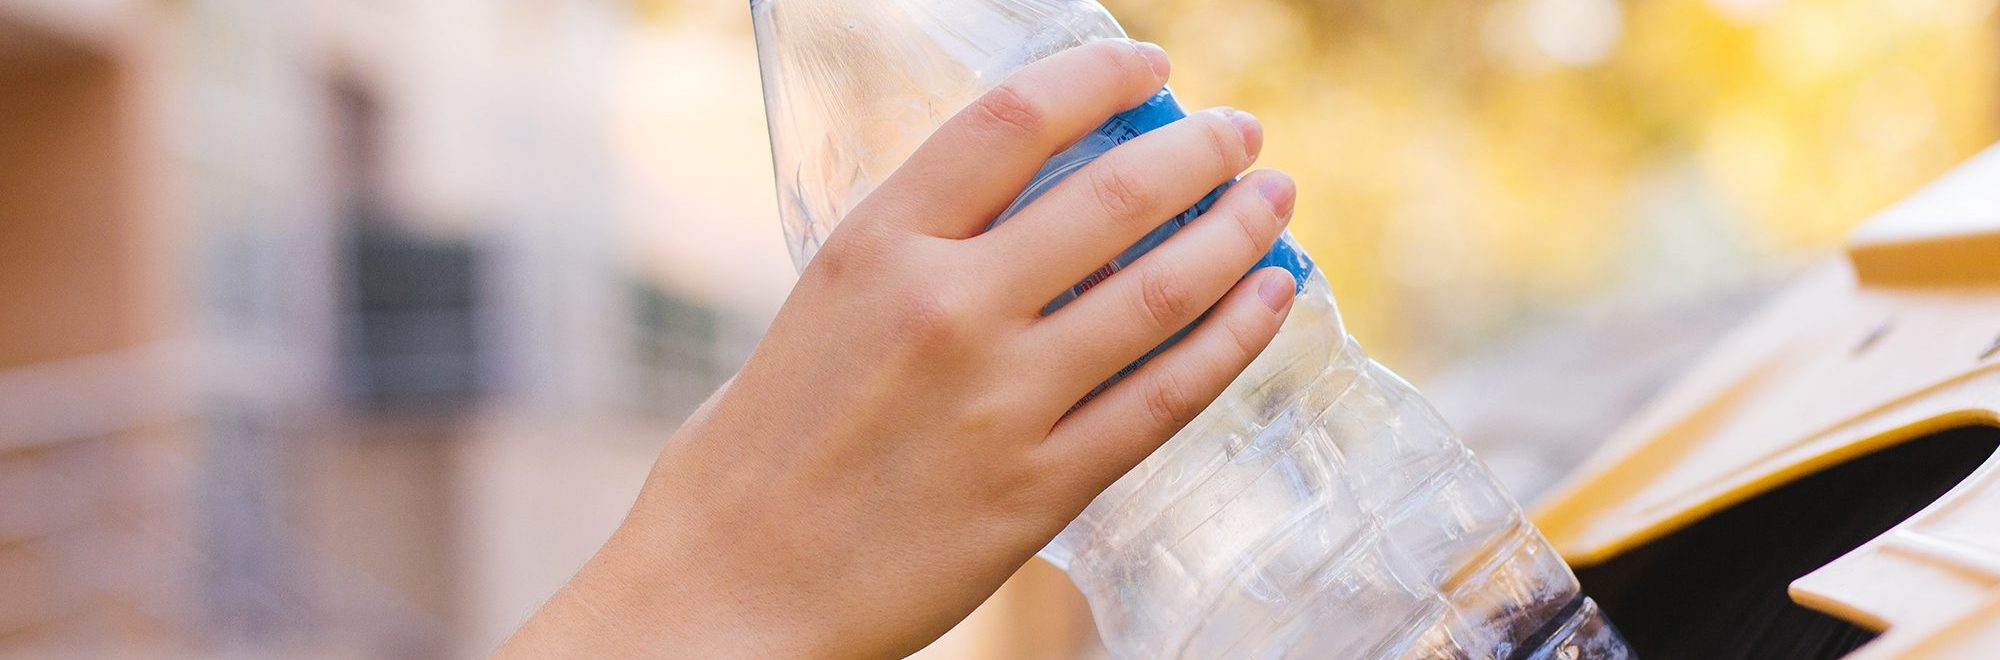 photo of a woman's hand recycling a plastic bottle